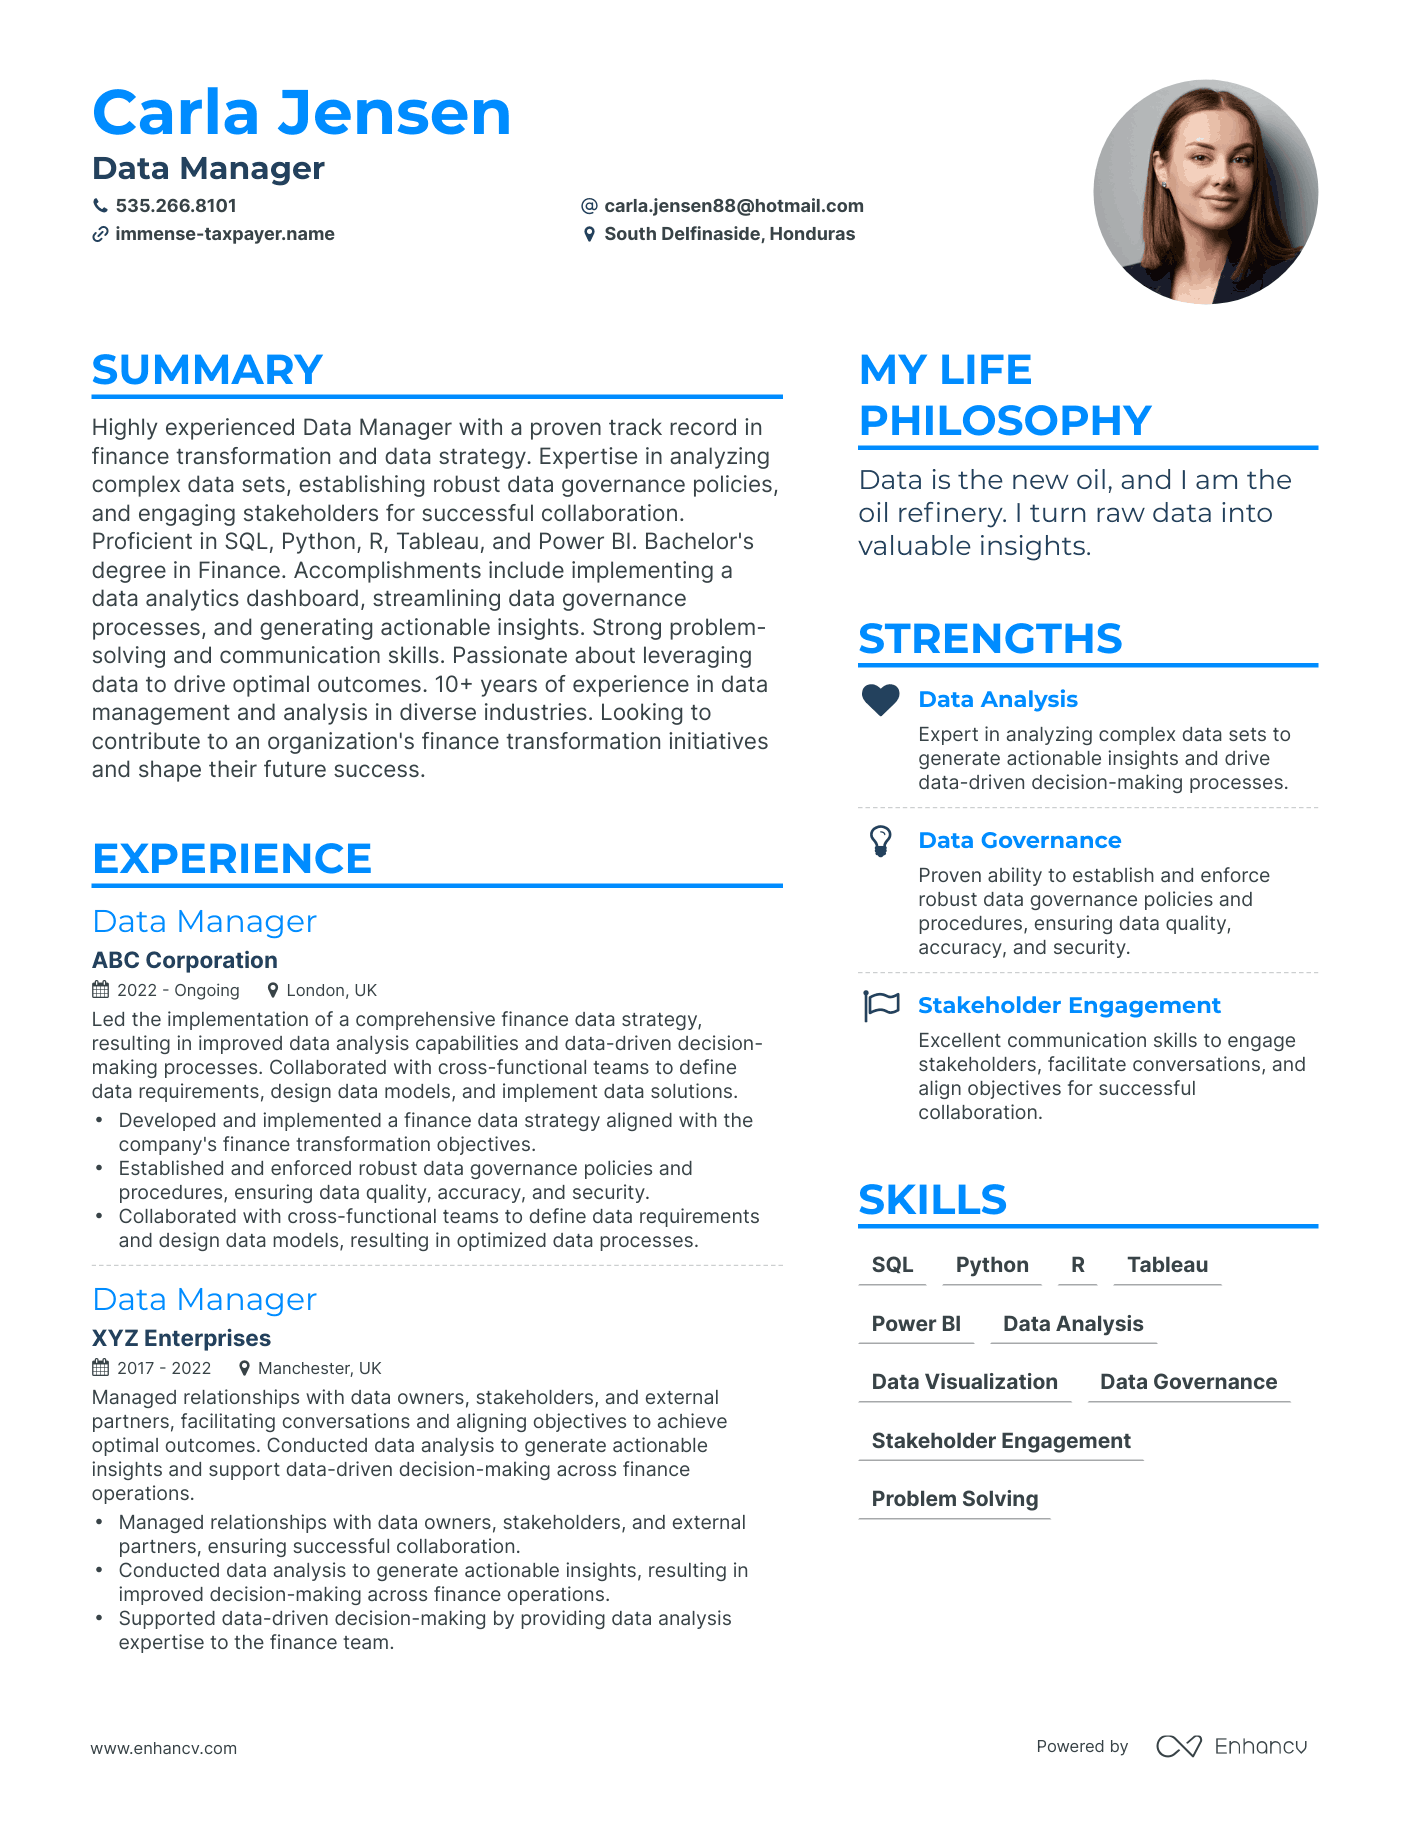 Data Manager resume example